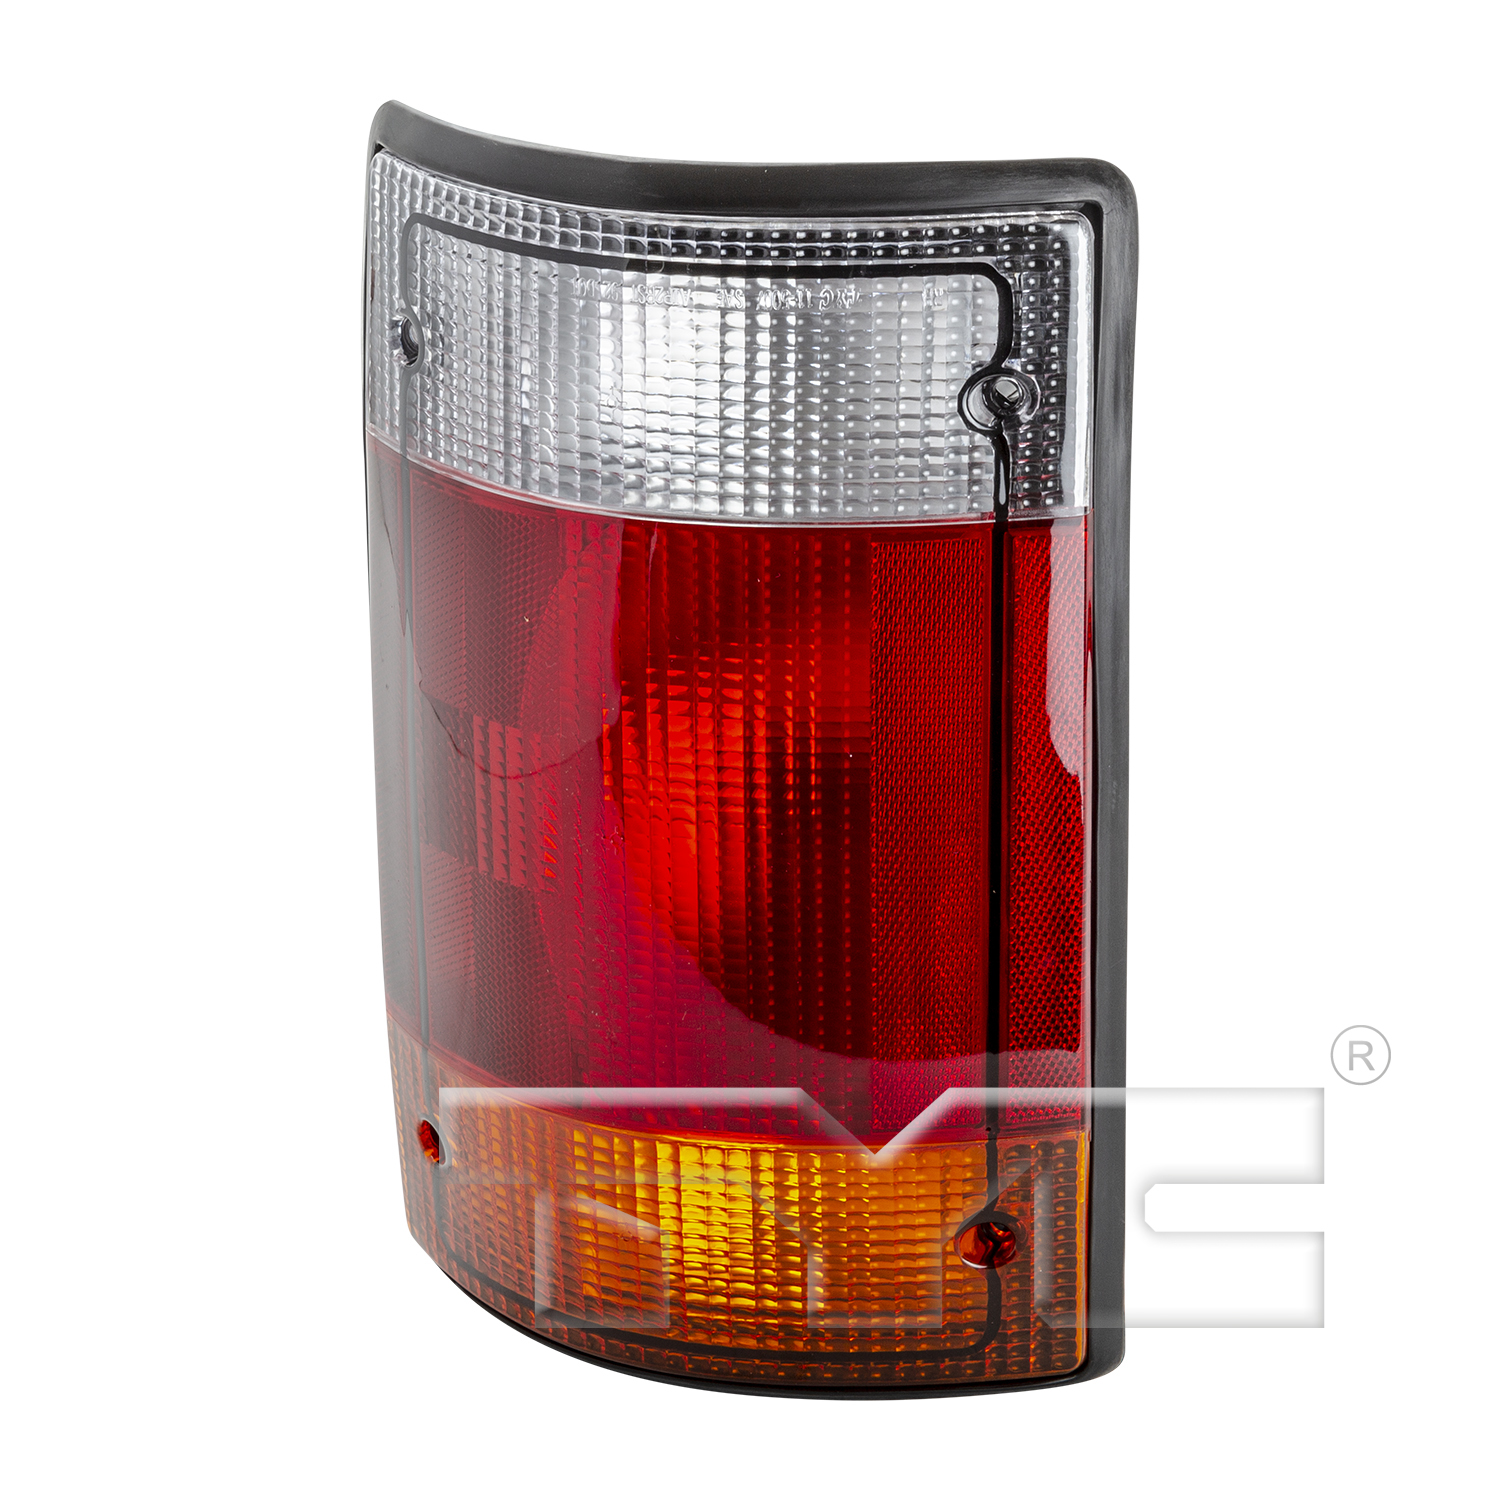 Aftermarket TAILLIGHTS for FORD - E-150 ECONOLINE, E-150 ECONOLINE,92-94,RT Taillamp assy